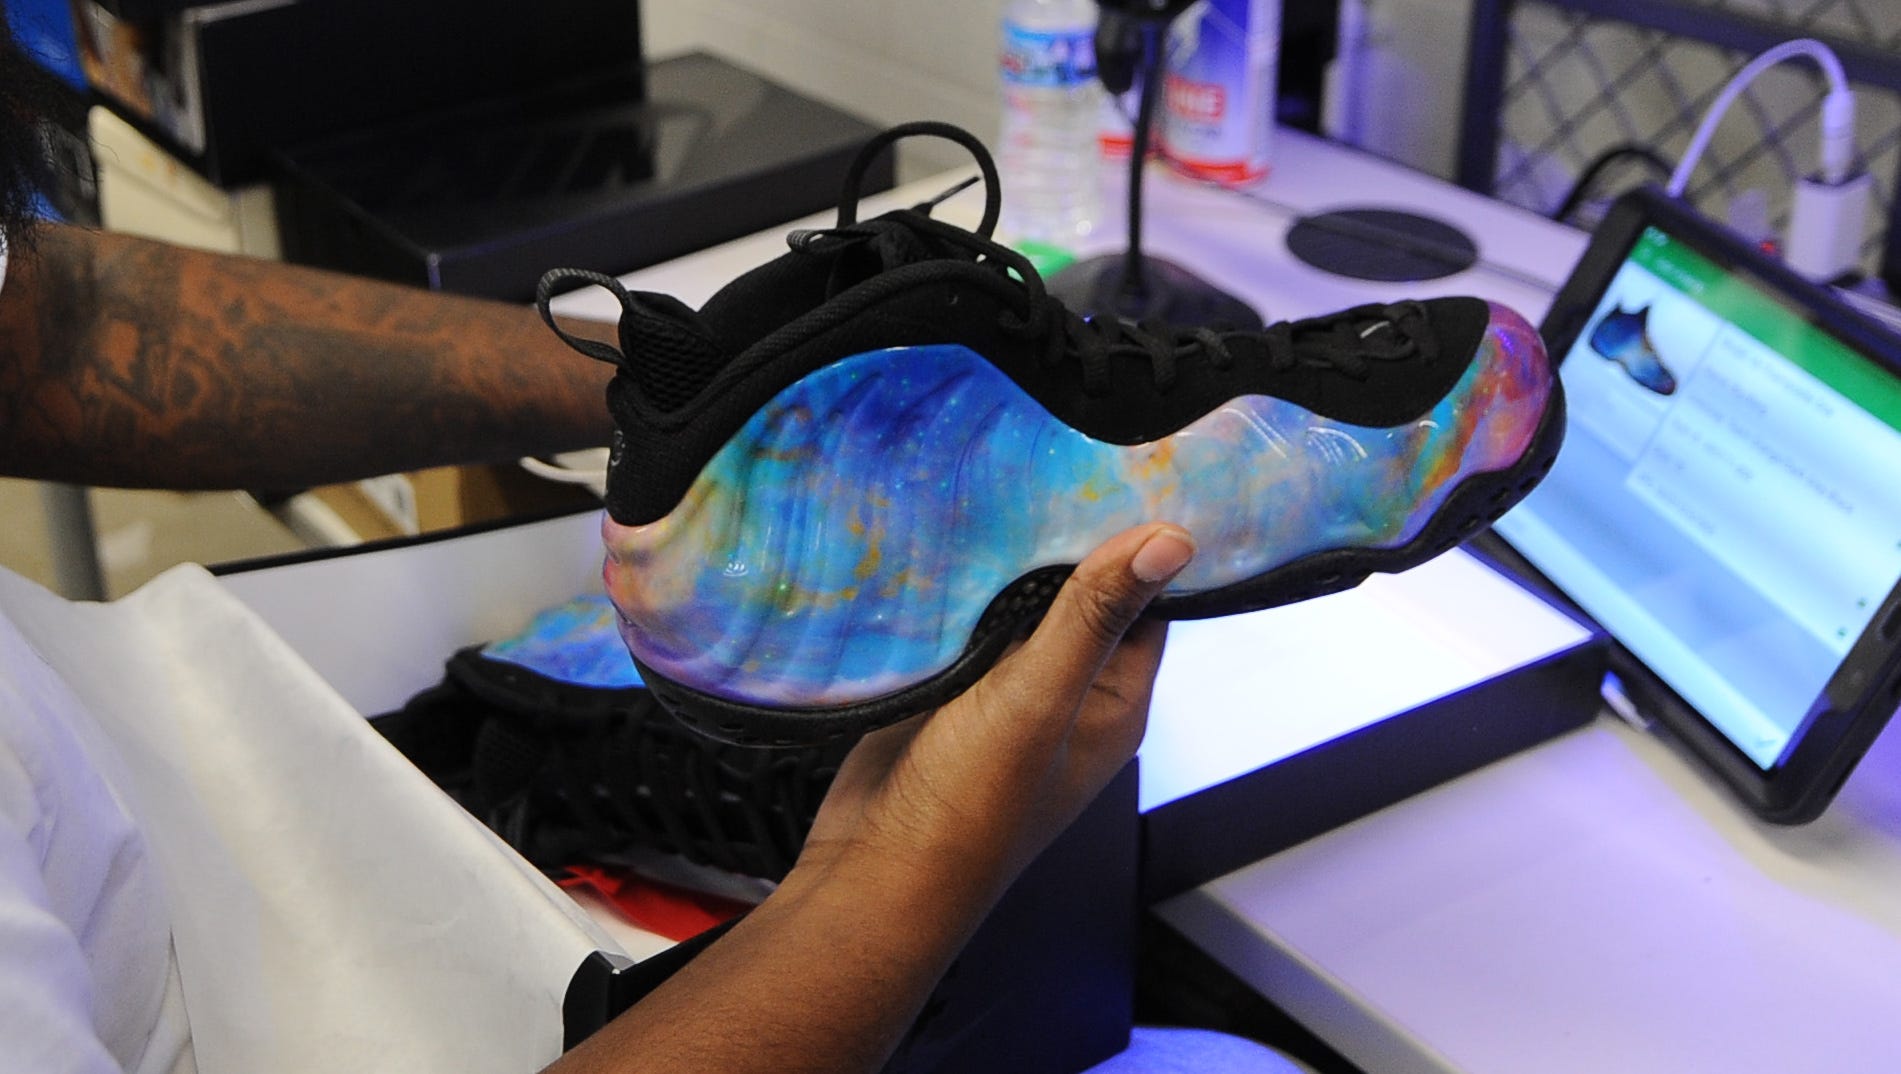 Aaron Fields, senior authenticator at StockX,  inspects a pair of Nike Air Formposite One shoes.